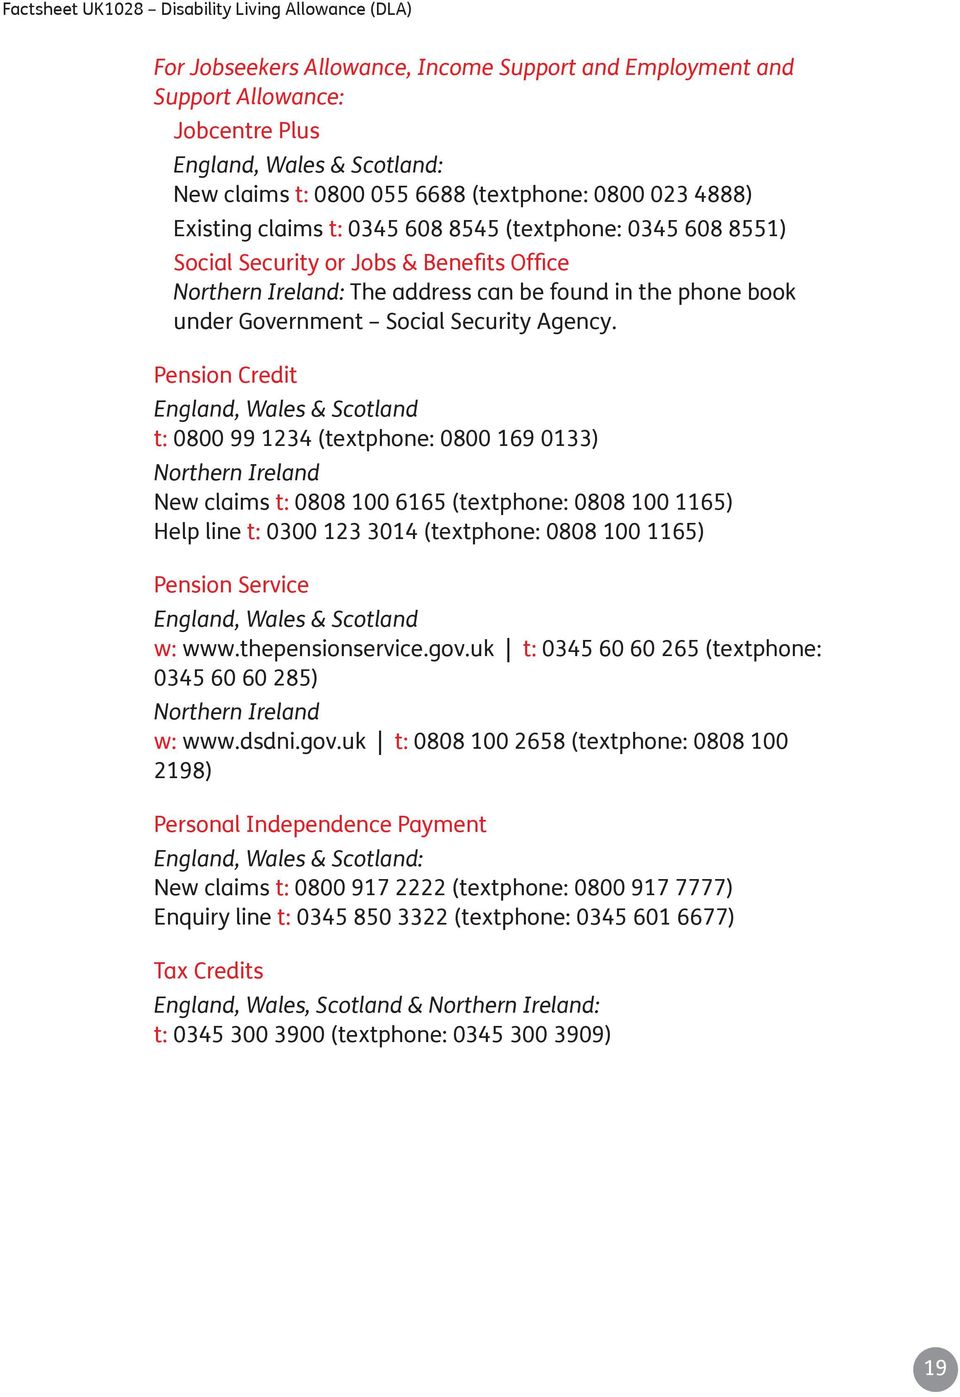 Pension Credit England, Wales & Scotland t: 0800 99 1234 (textphone: 0800 169 0133) Northern Ireland New claims t: 0808 100 6165 (textphone: 0808 100 1165) Help line t: 0300 123 3014 (textphone: 0808